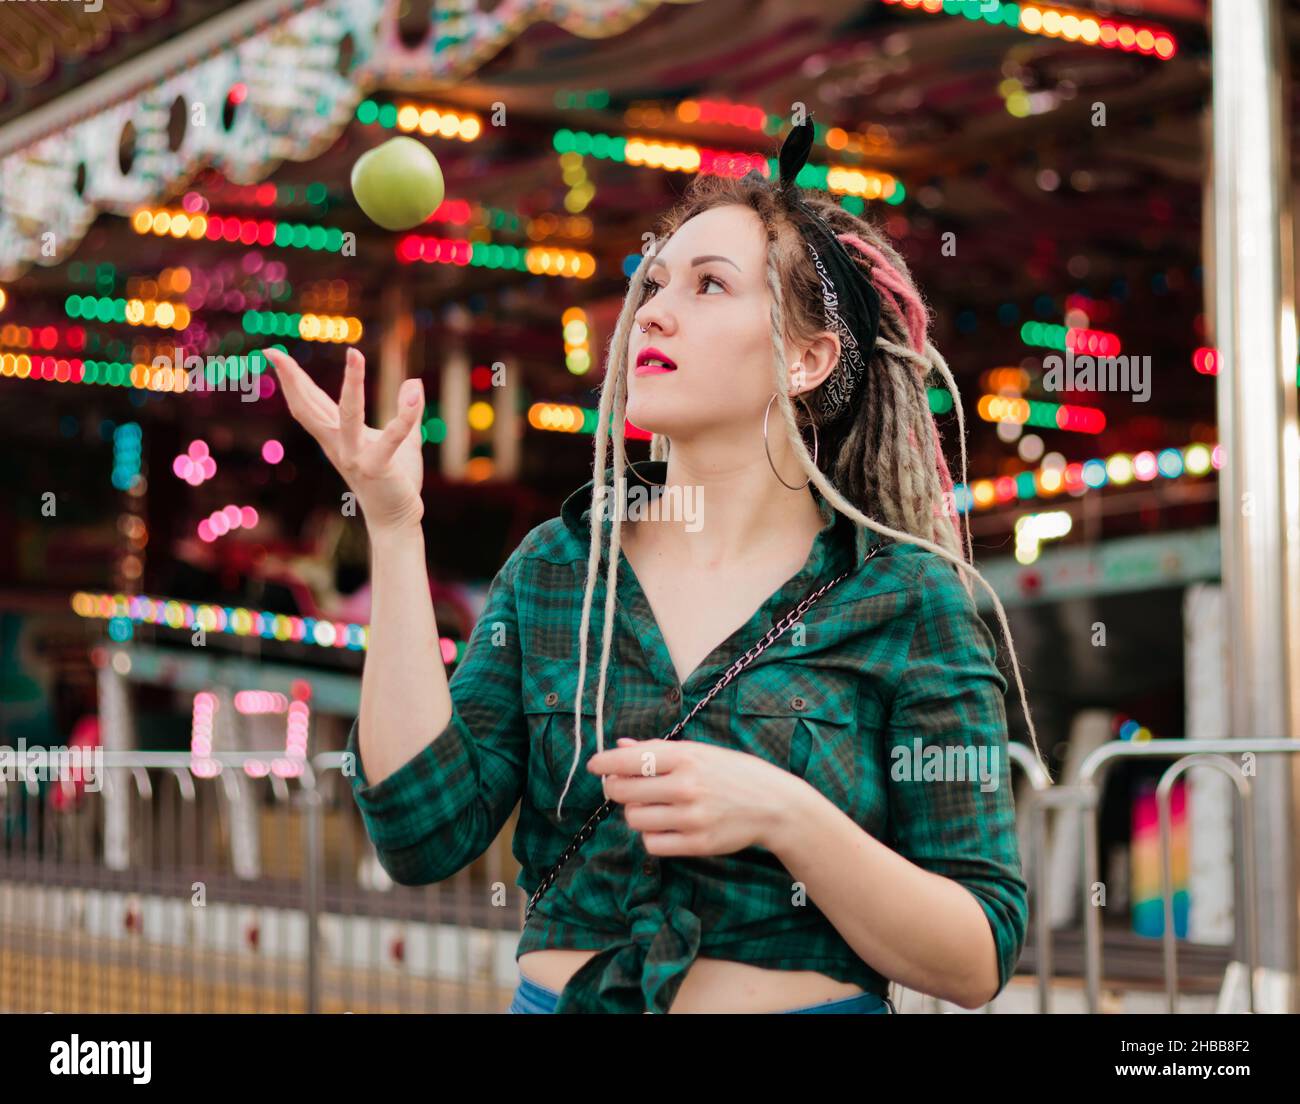 Inordinate young woman with dreadlocks hairstyle and fashionable summer clothes throws apple in amusement park. Stock Photo